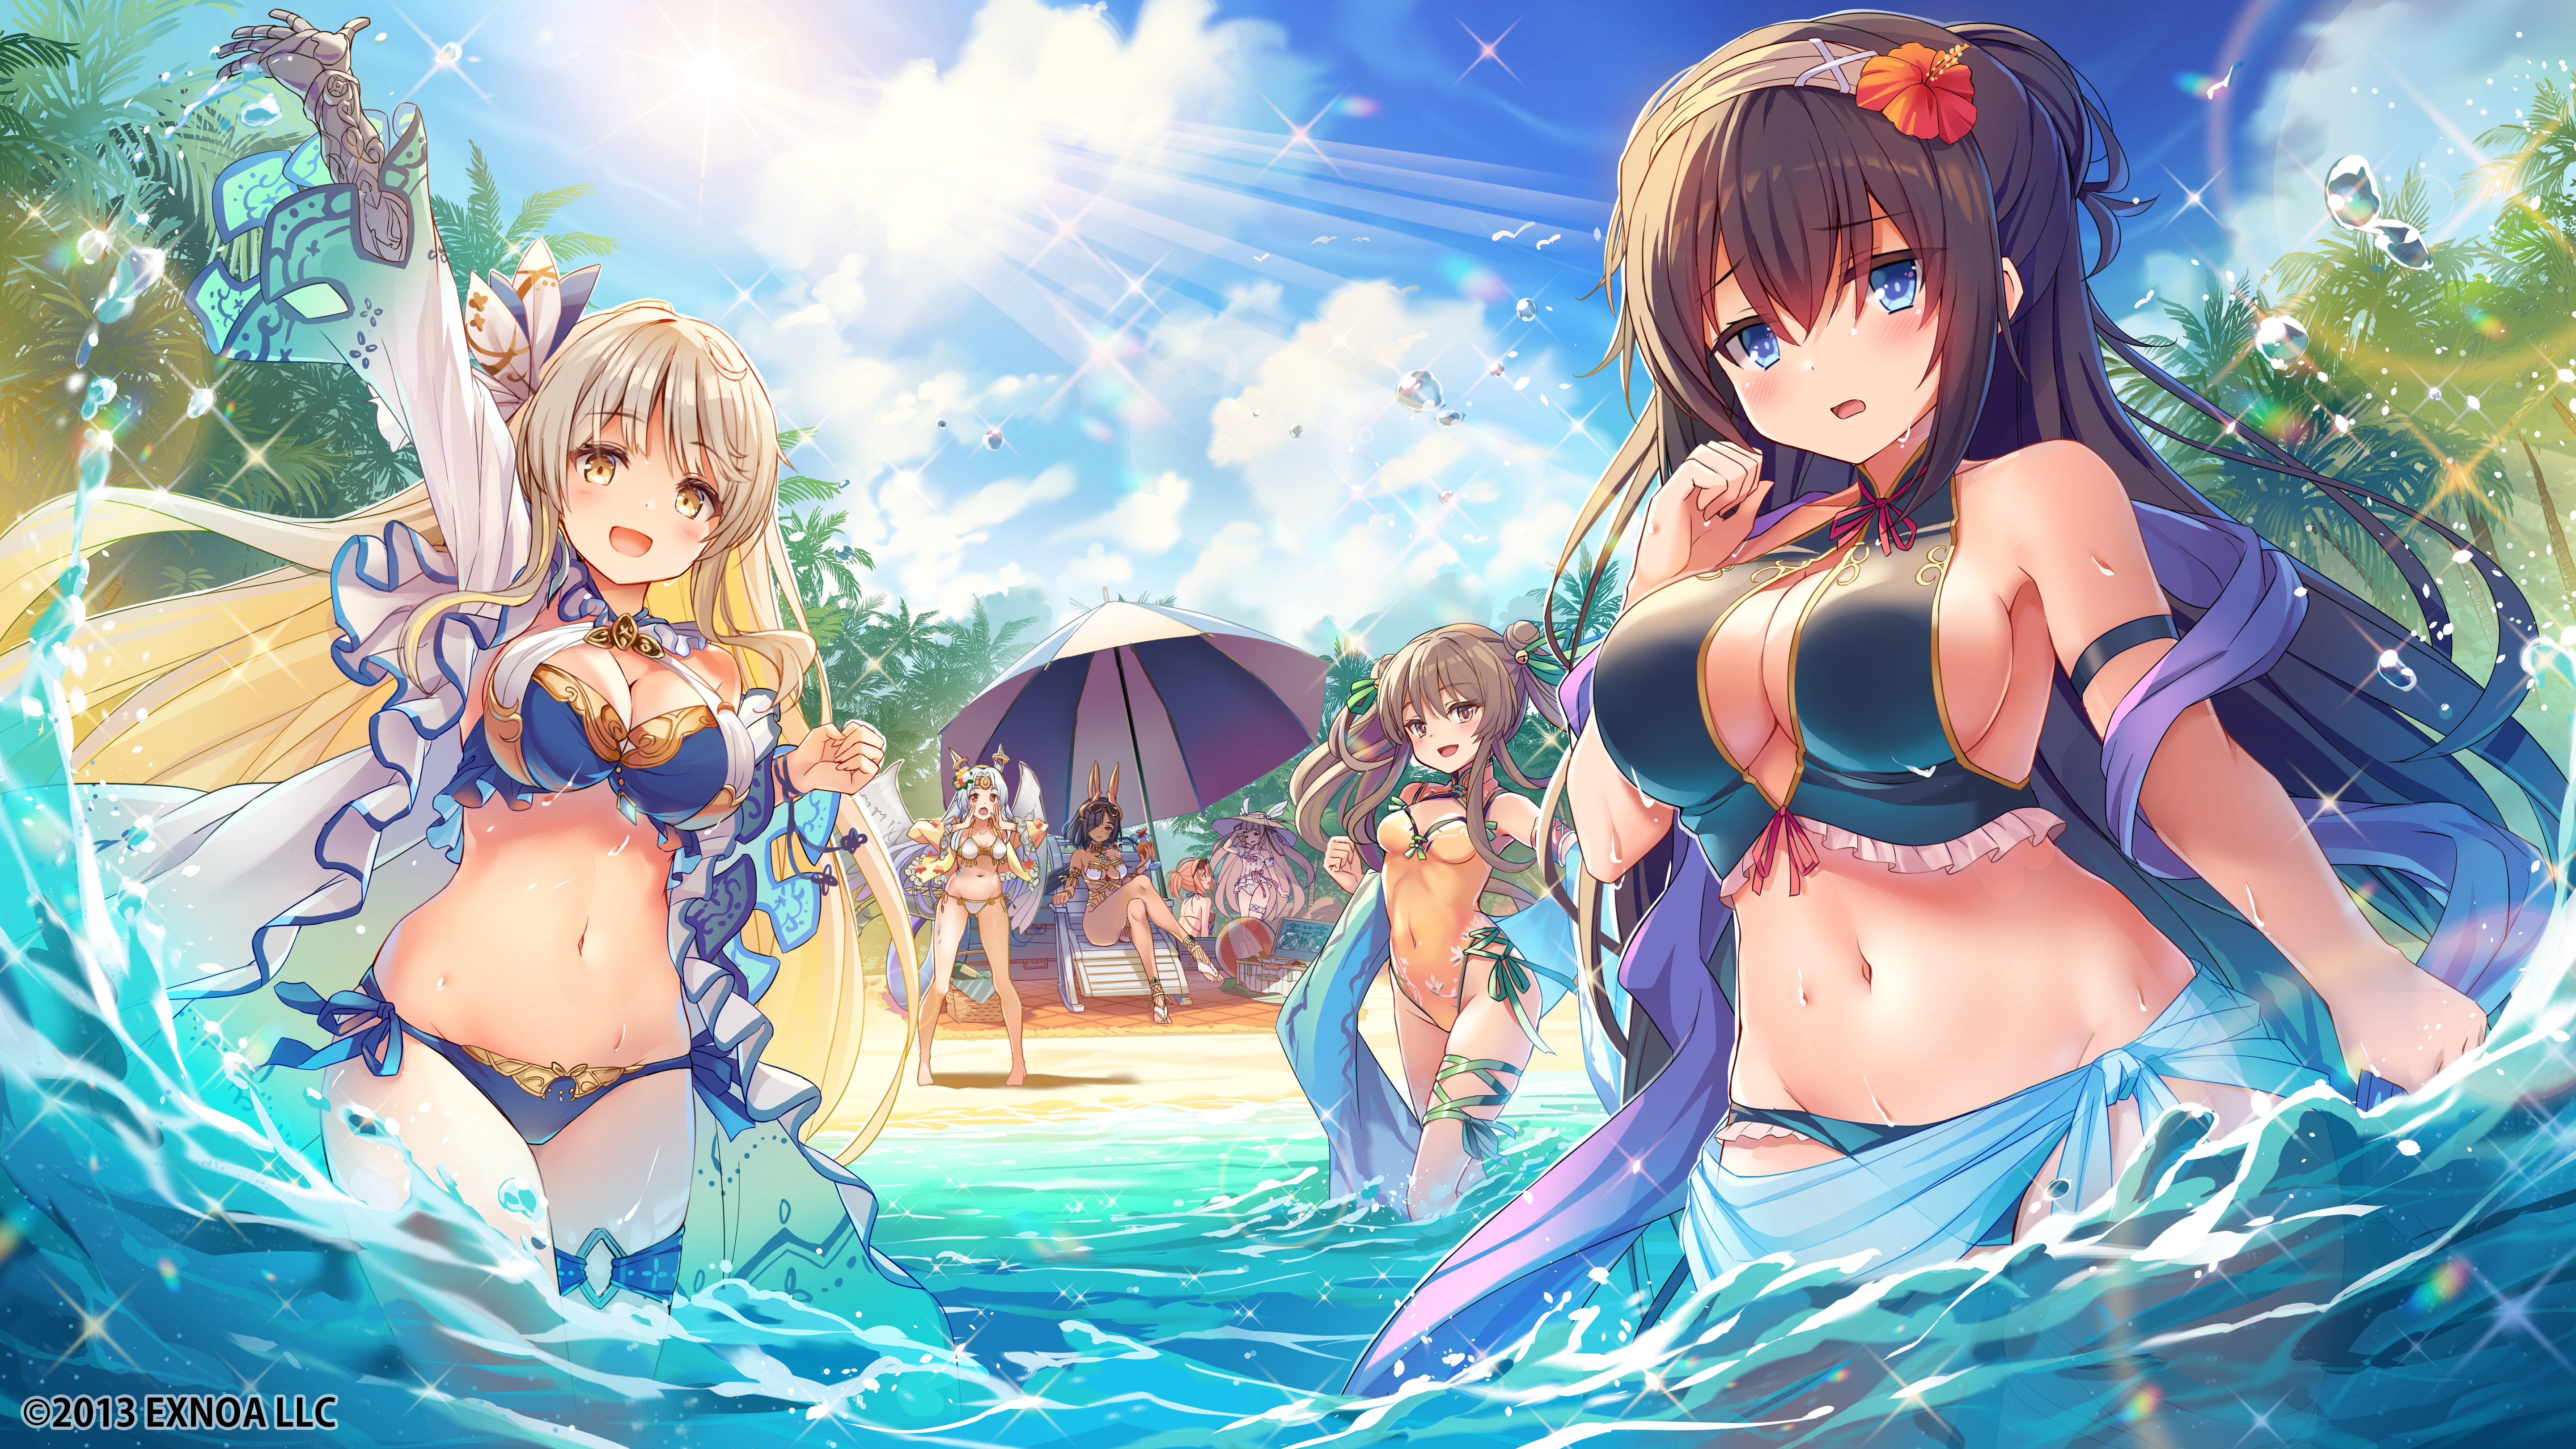 Anime 5760x3240 Sennen Sensou Aigis sky group of women bikini swimwear water drops standing in water water looking at viewer beach one-piece swimsuit clouds boobs women on beach women outdoors waving Horteus (Sennen Sensou Aigis) Nataku (Sennen Sensou Aigis) Sanara (Sennen Sensou Aigis) Puro (Sennen Sensou Aigis) Rinne (Sennen Sensou Aigis) Tram (Sennen Sensou Aigis) Wurm (Sennen Sensou Aigis) sunlight hair ornament legs crossed open clothes palm trees open mouth animal ears beach ball flower in hair sunbed beach umbrella sparkles watermarked hibiscus one arm up smiling sarong anime girls